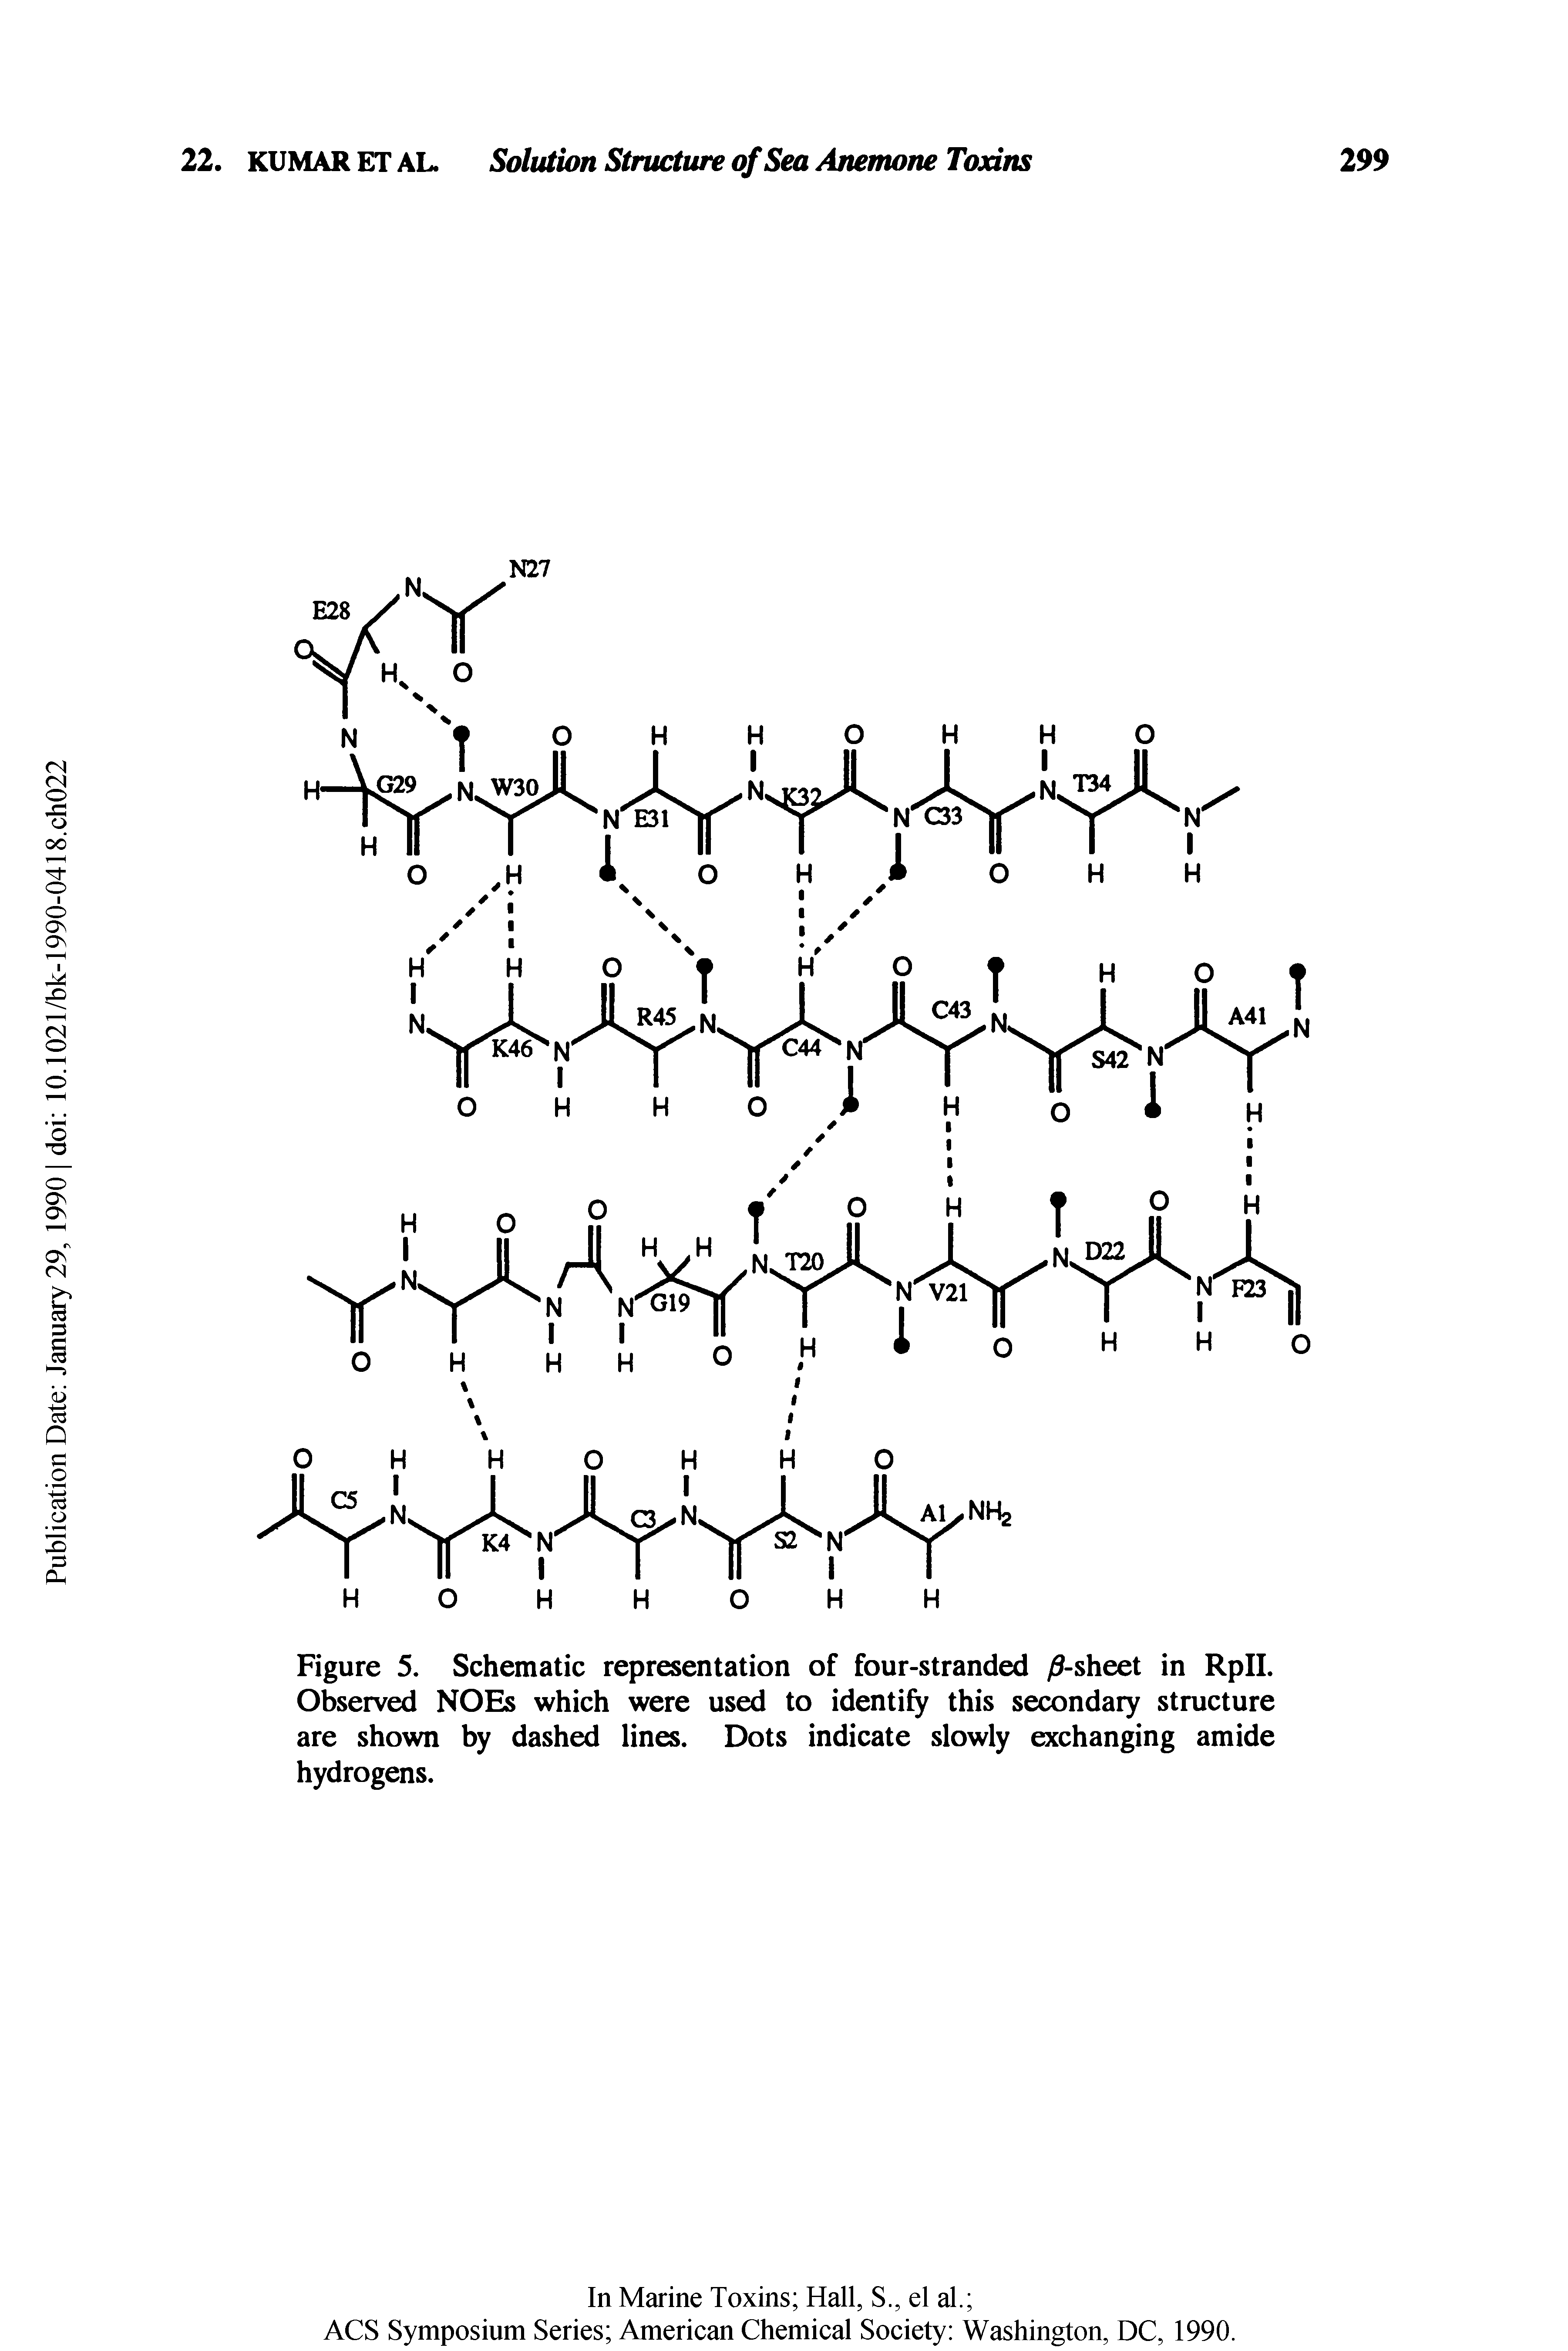 Figure 5. Schematic representation of four-stranded )9-sheet in RpII. Observed NOEs which were used to identify this secondary structure are shown by dashed lines. Dots indicate slowly exchanging amide hydrogens.